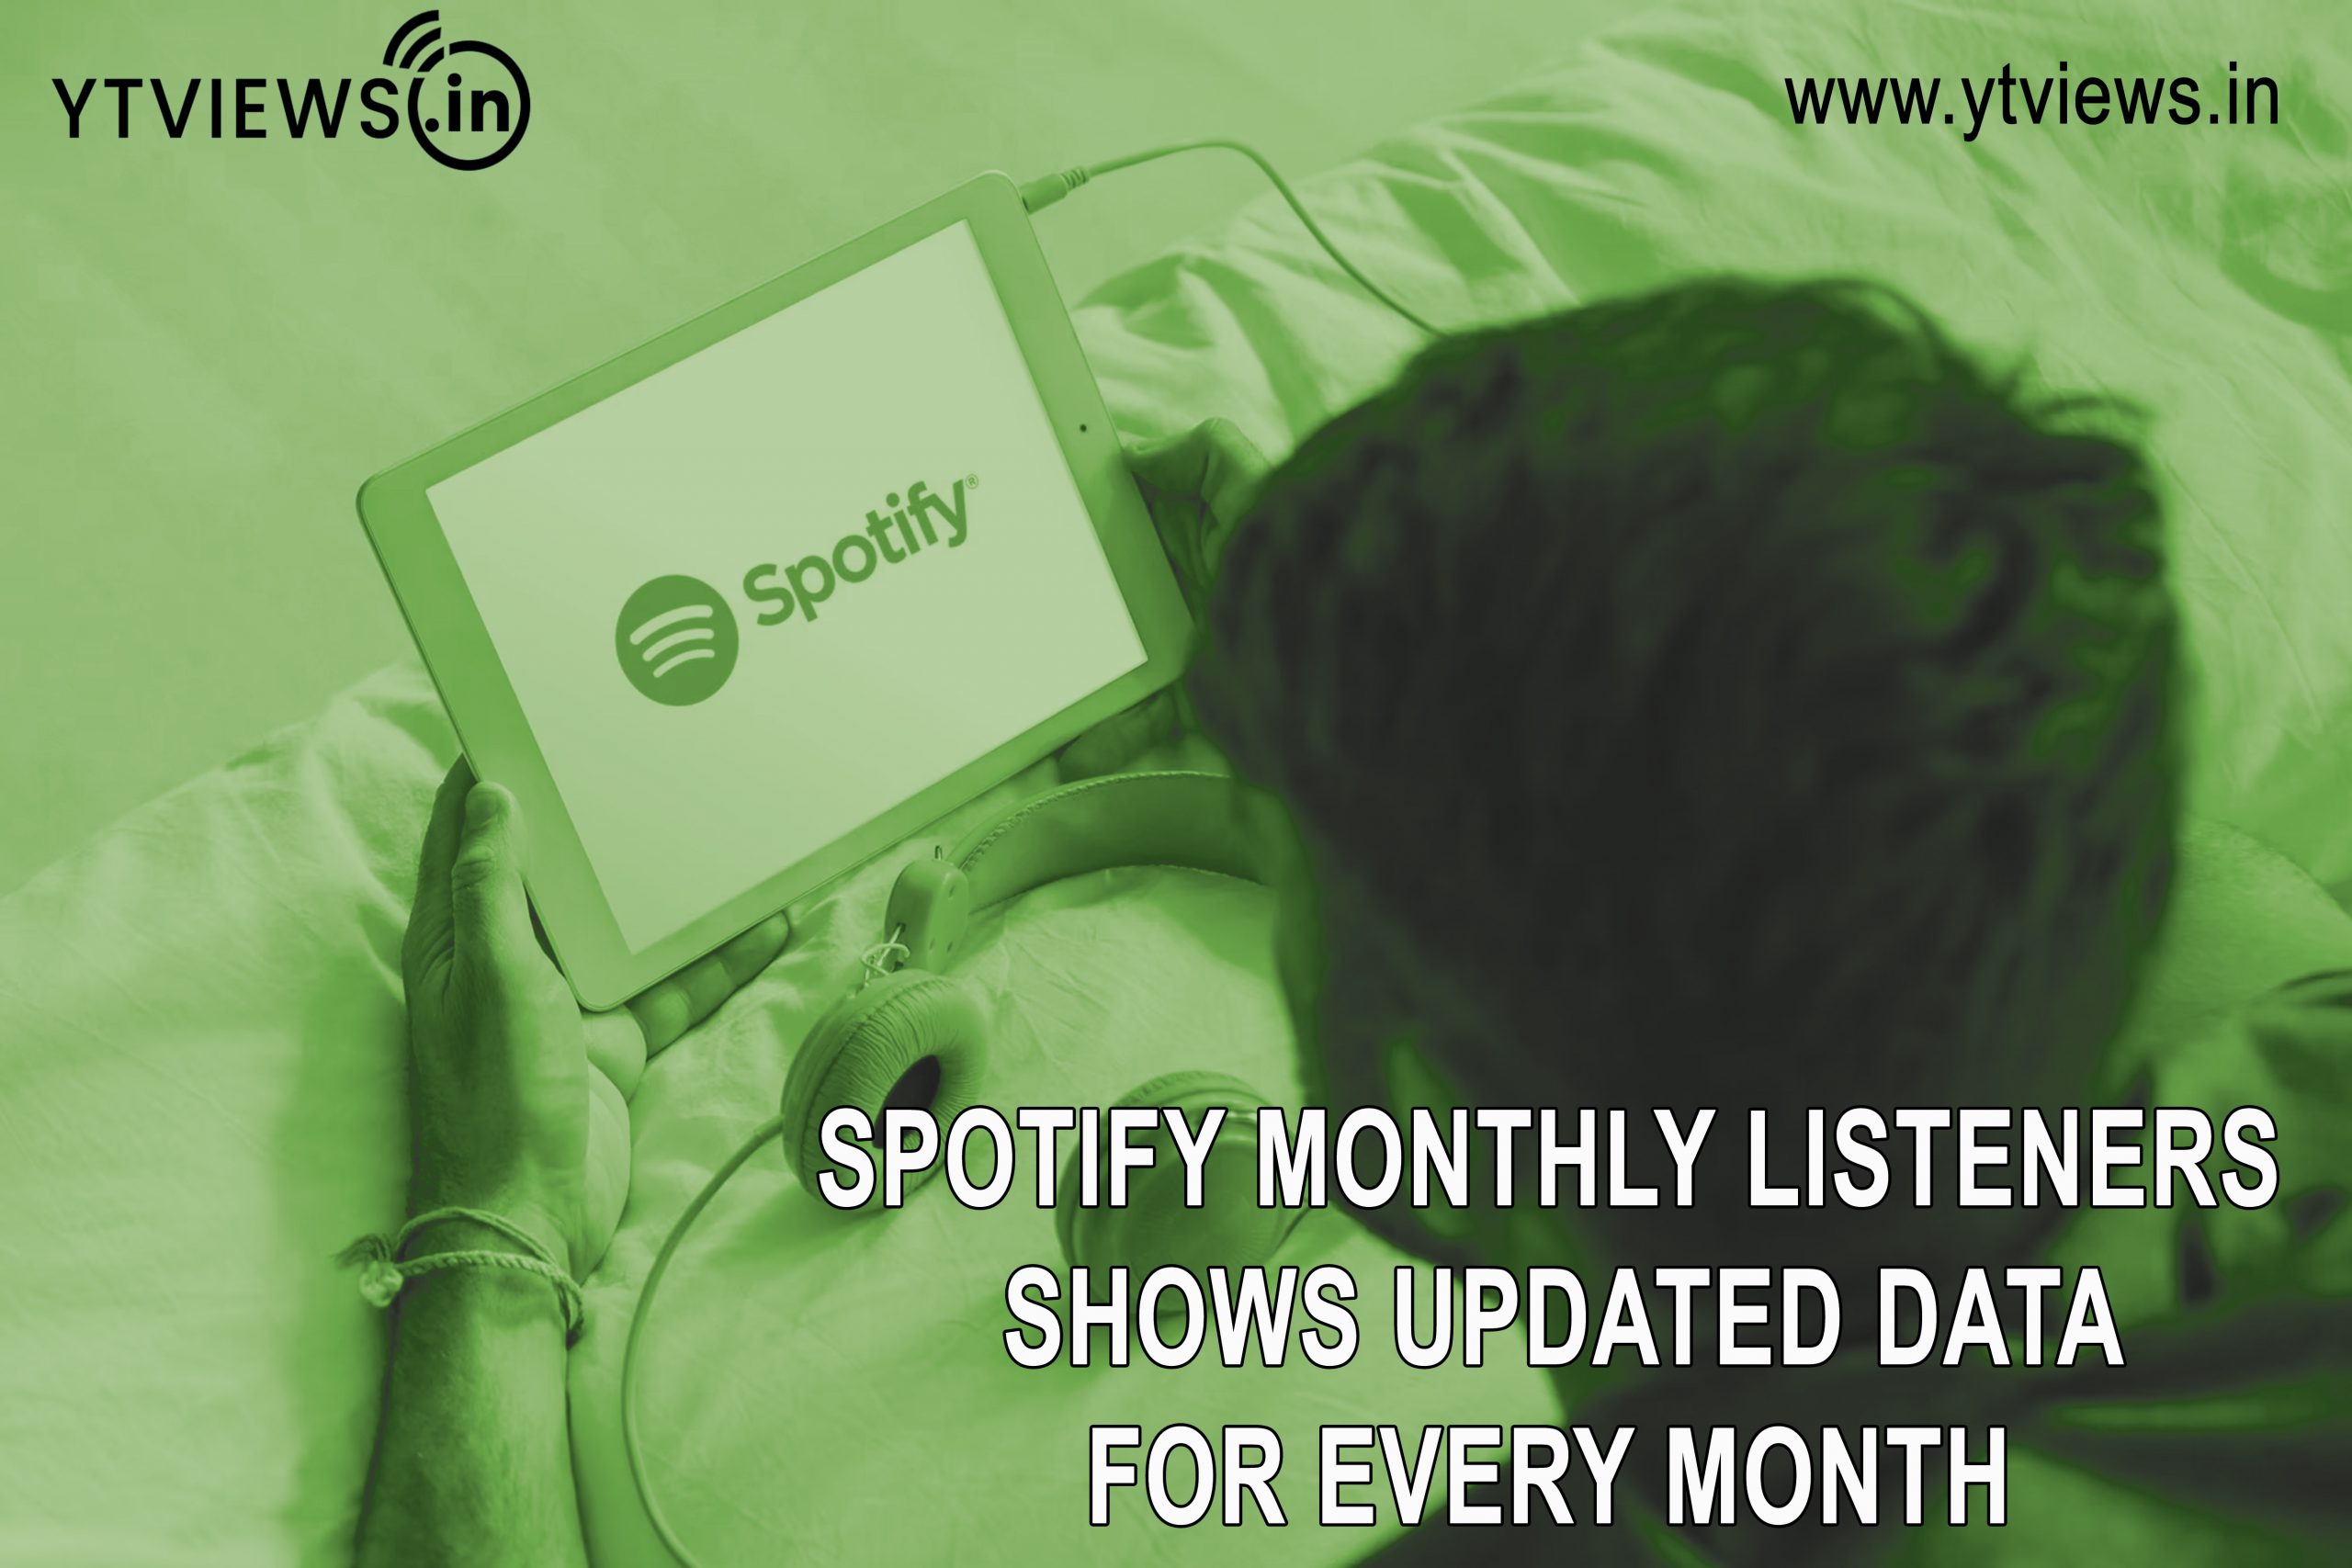 Spotify Monthly Listeners shows updated data for every month